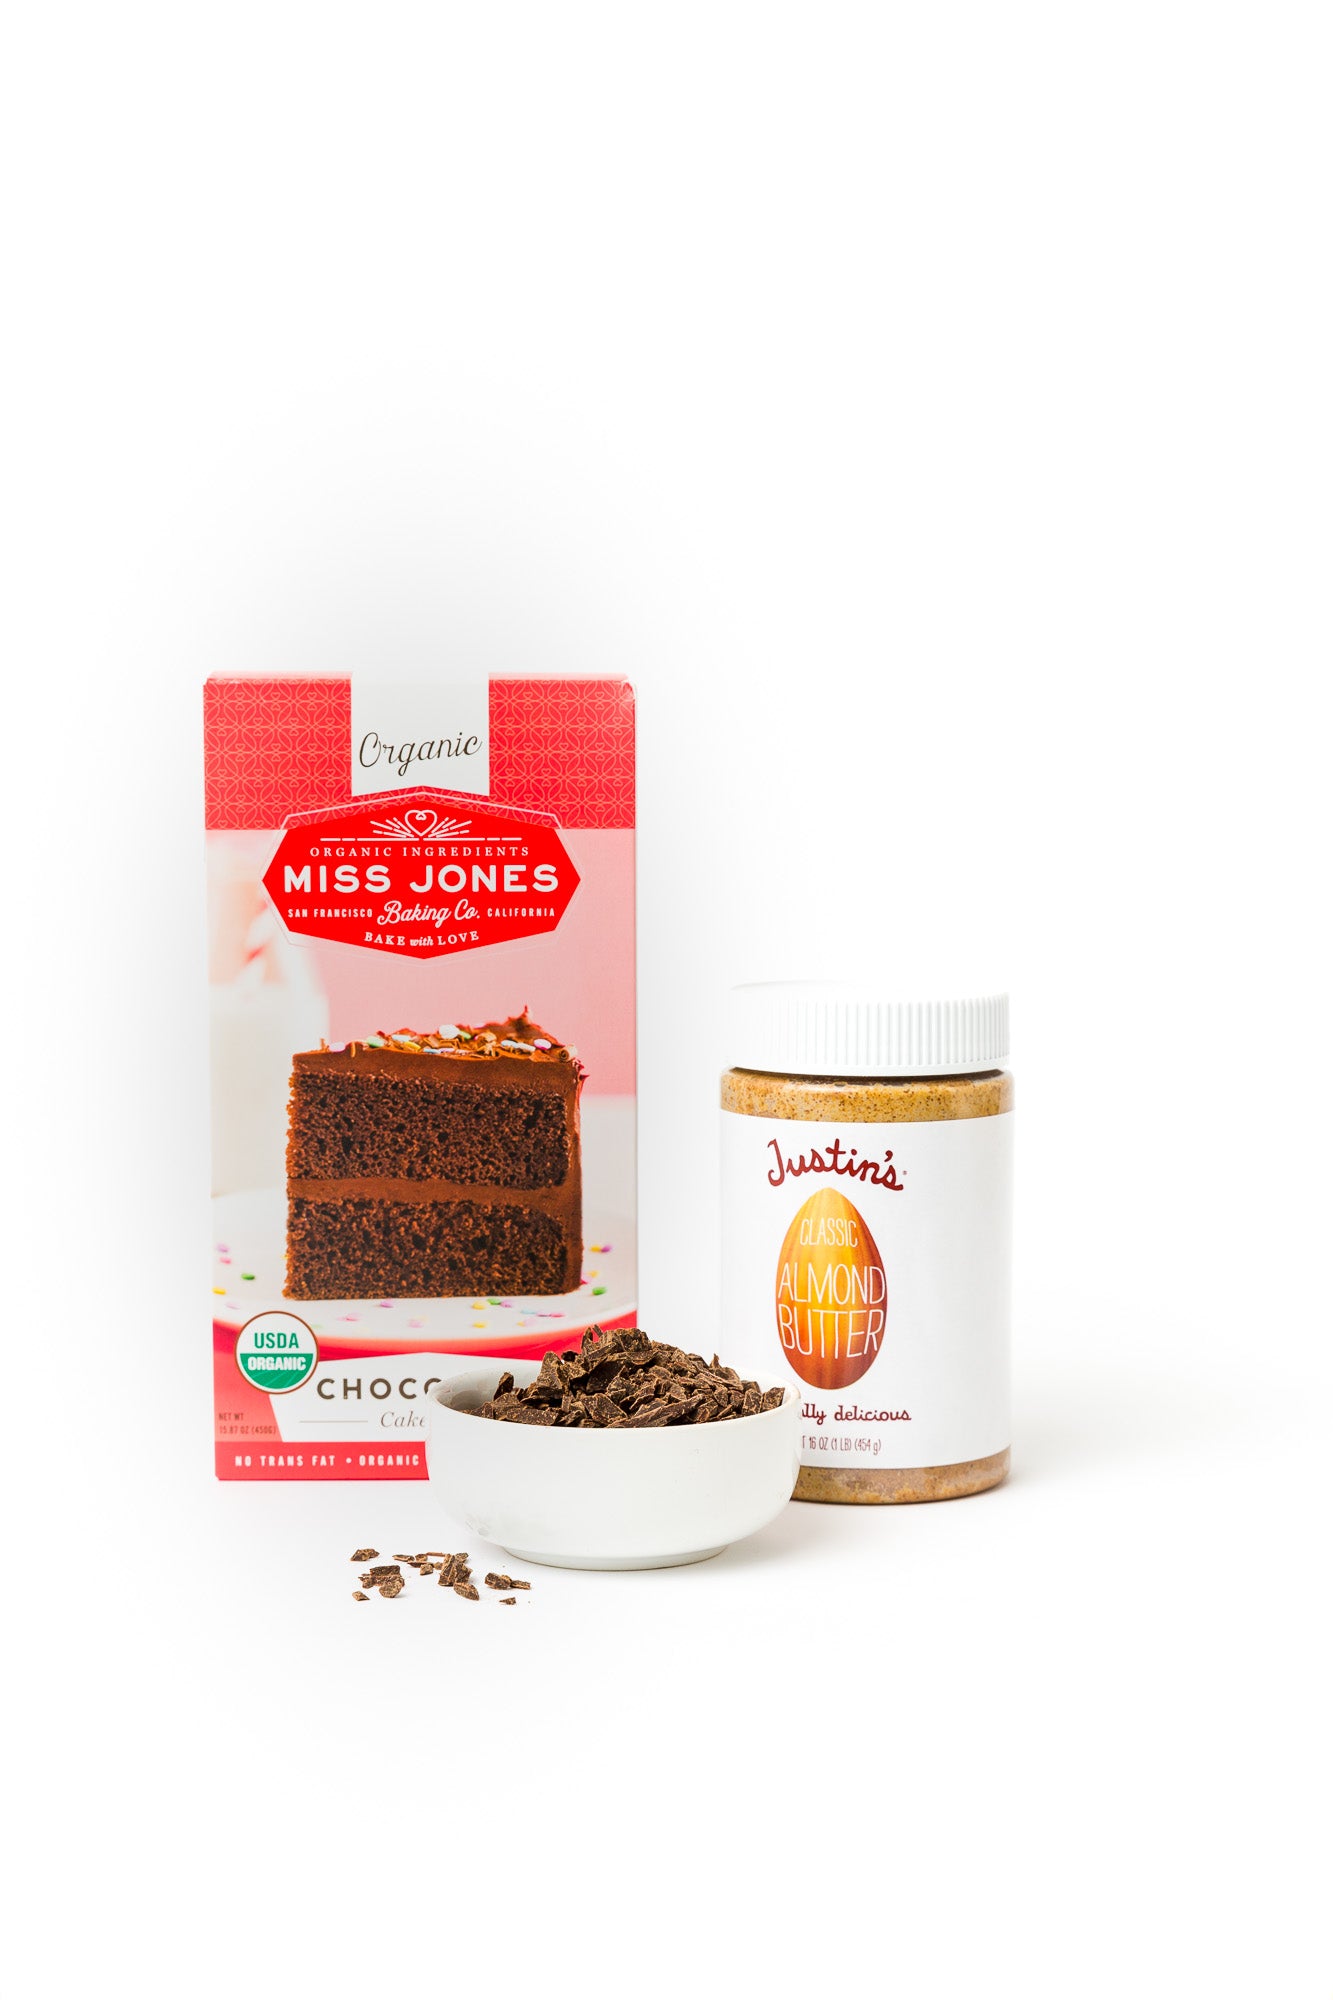 Image of Miss Jones Chocolate Cake Mix and Justin's Almond Butter behind a bowl of chocolate used for Miss Jones Baking Co Chocolate Almond Butter Bundt Cake recipe